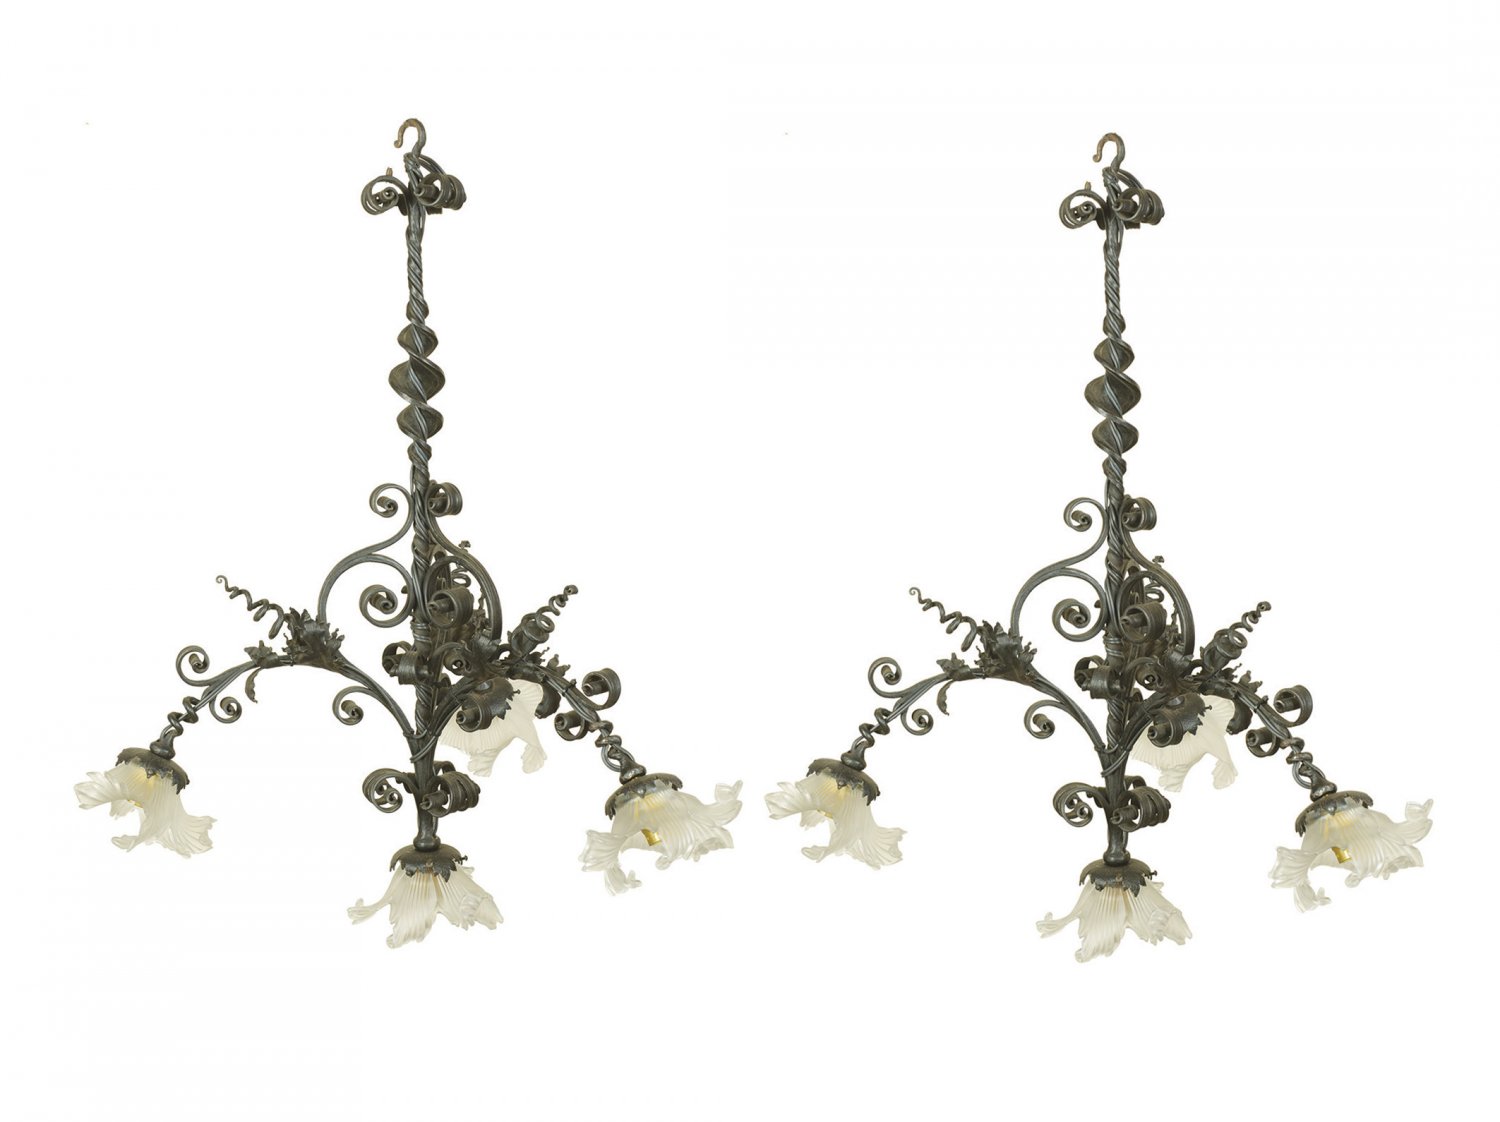 Pair of wrought iron chandeliers